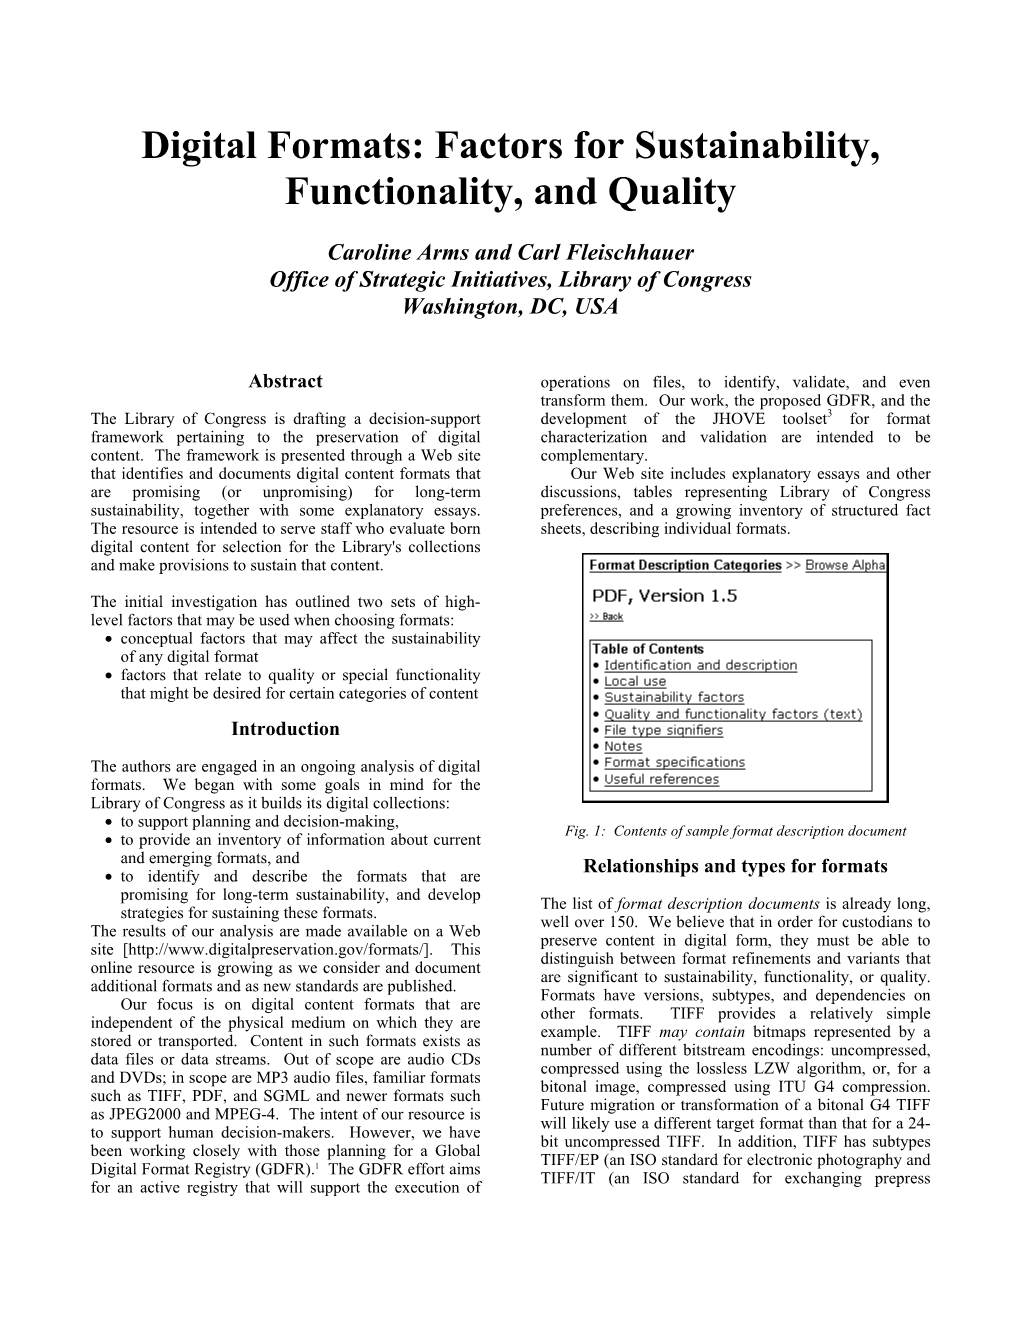 Digital Formats: Factors for Sustainability, Functionality, and Quality